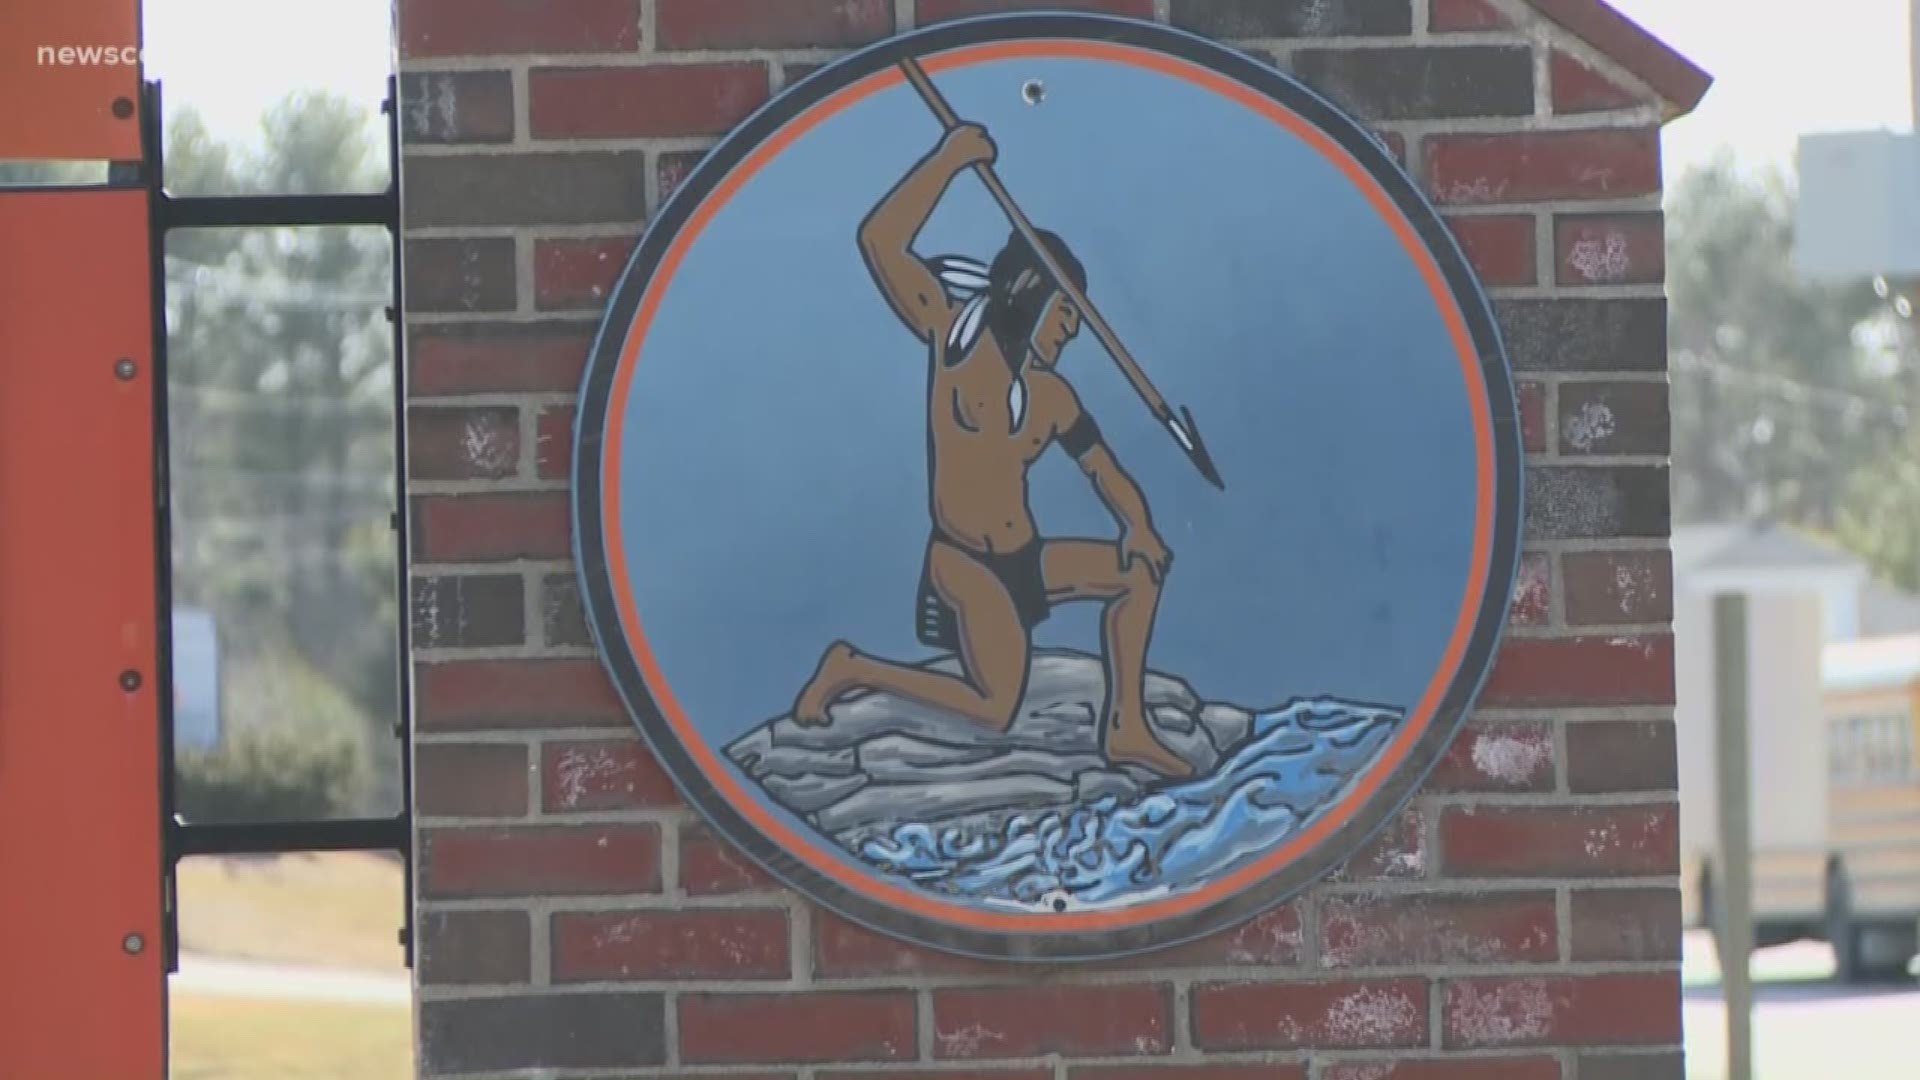 A bill banning all Native American Mascots from Maine was signed by Governor Mills on Thursday. The bill applies to all Maine public schools and universities.